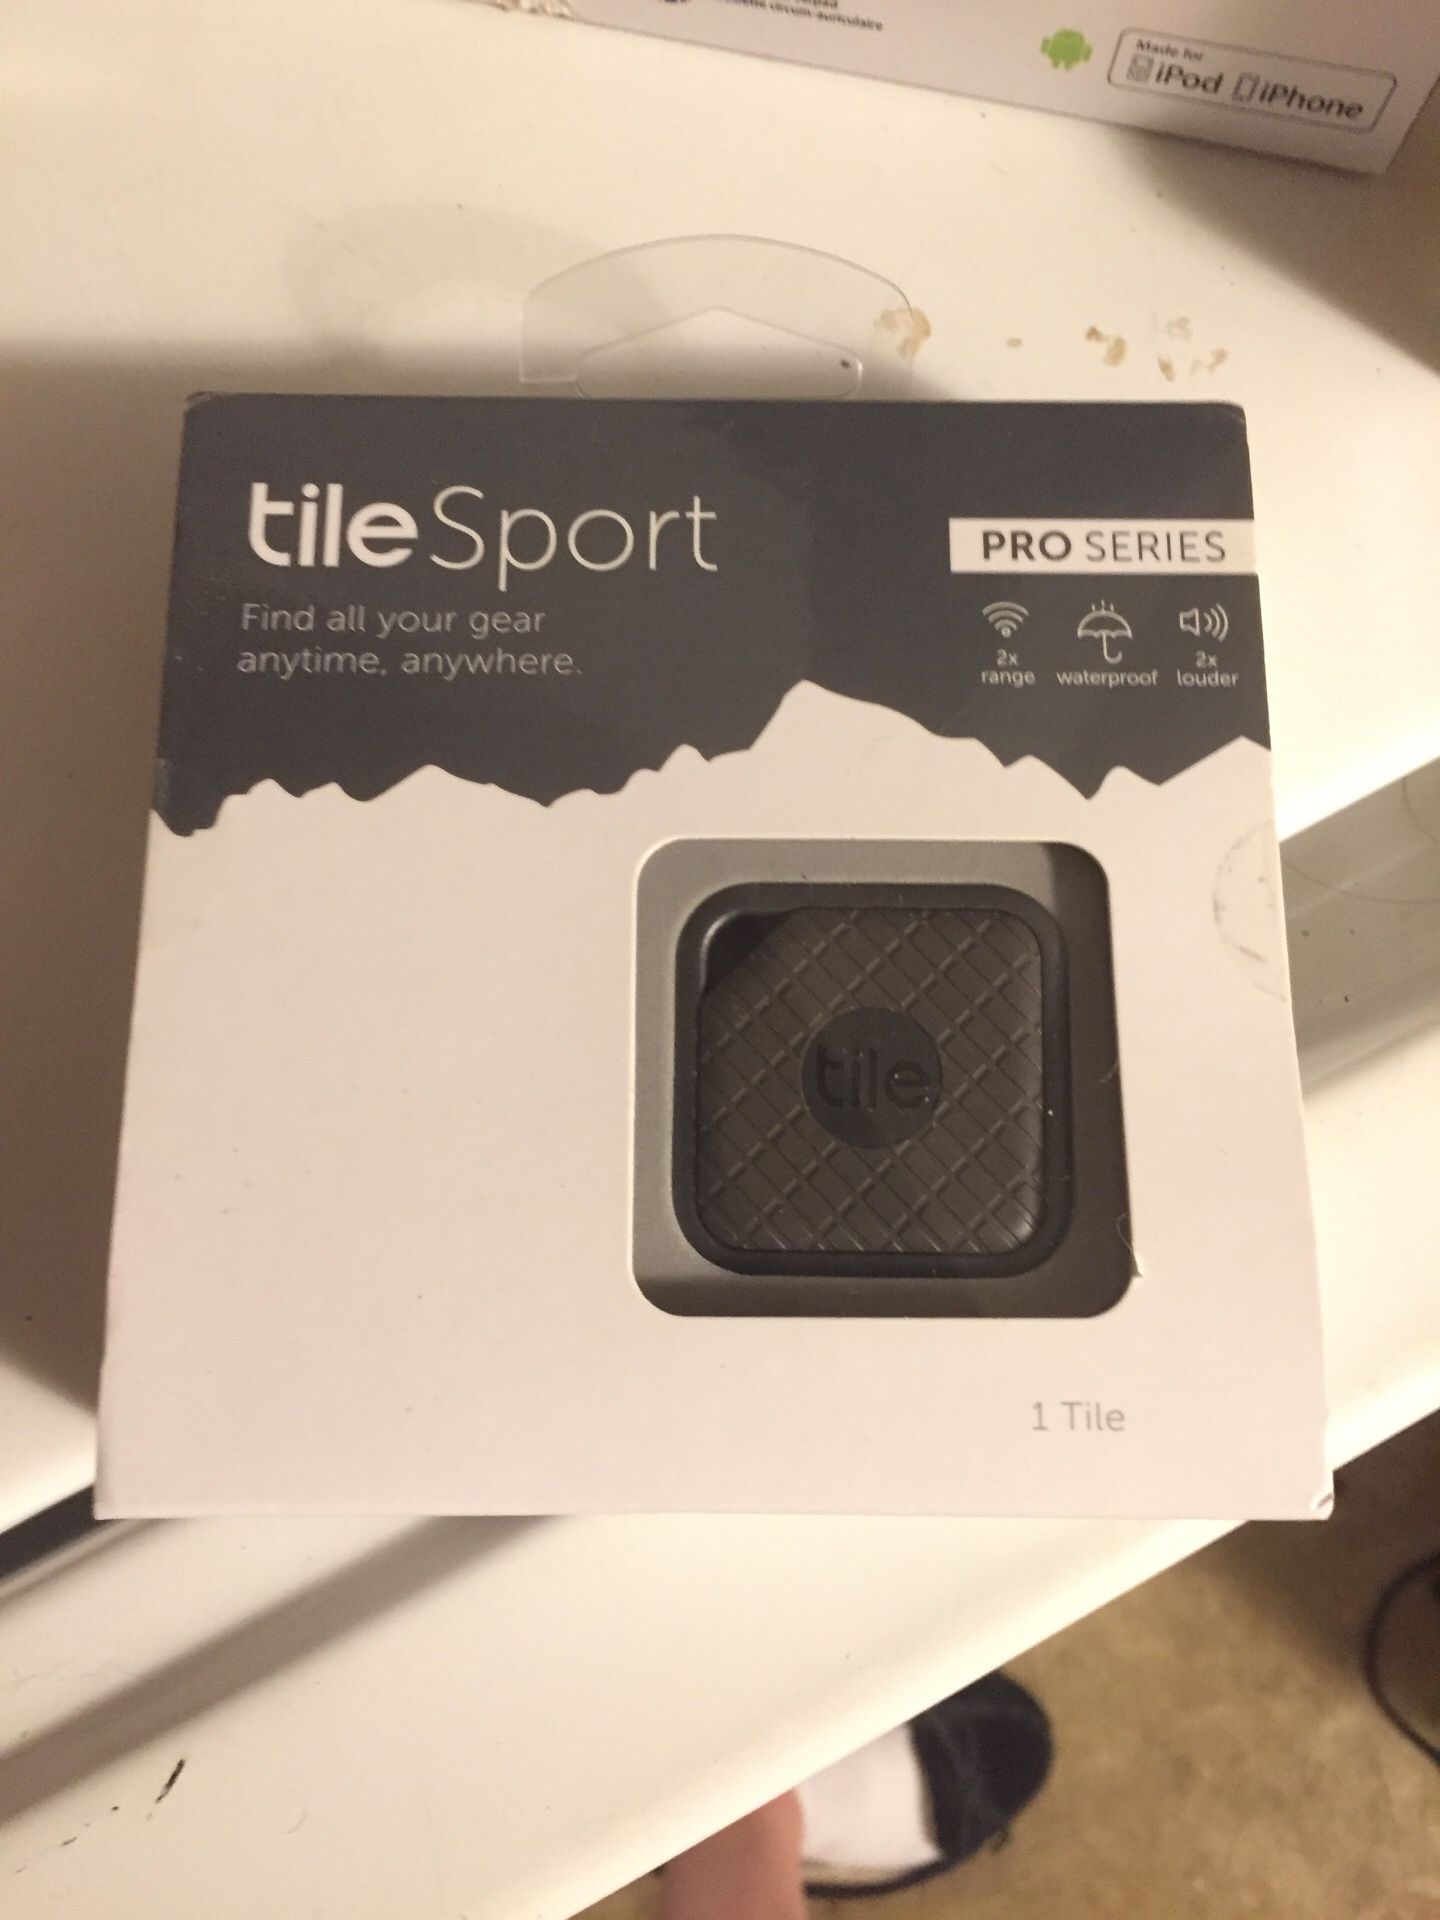 Pro Series Tile Sport, Finding your things and phone